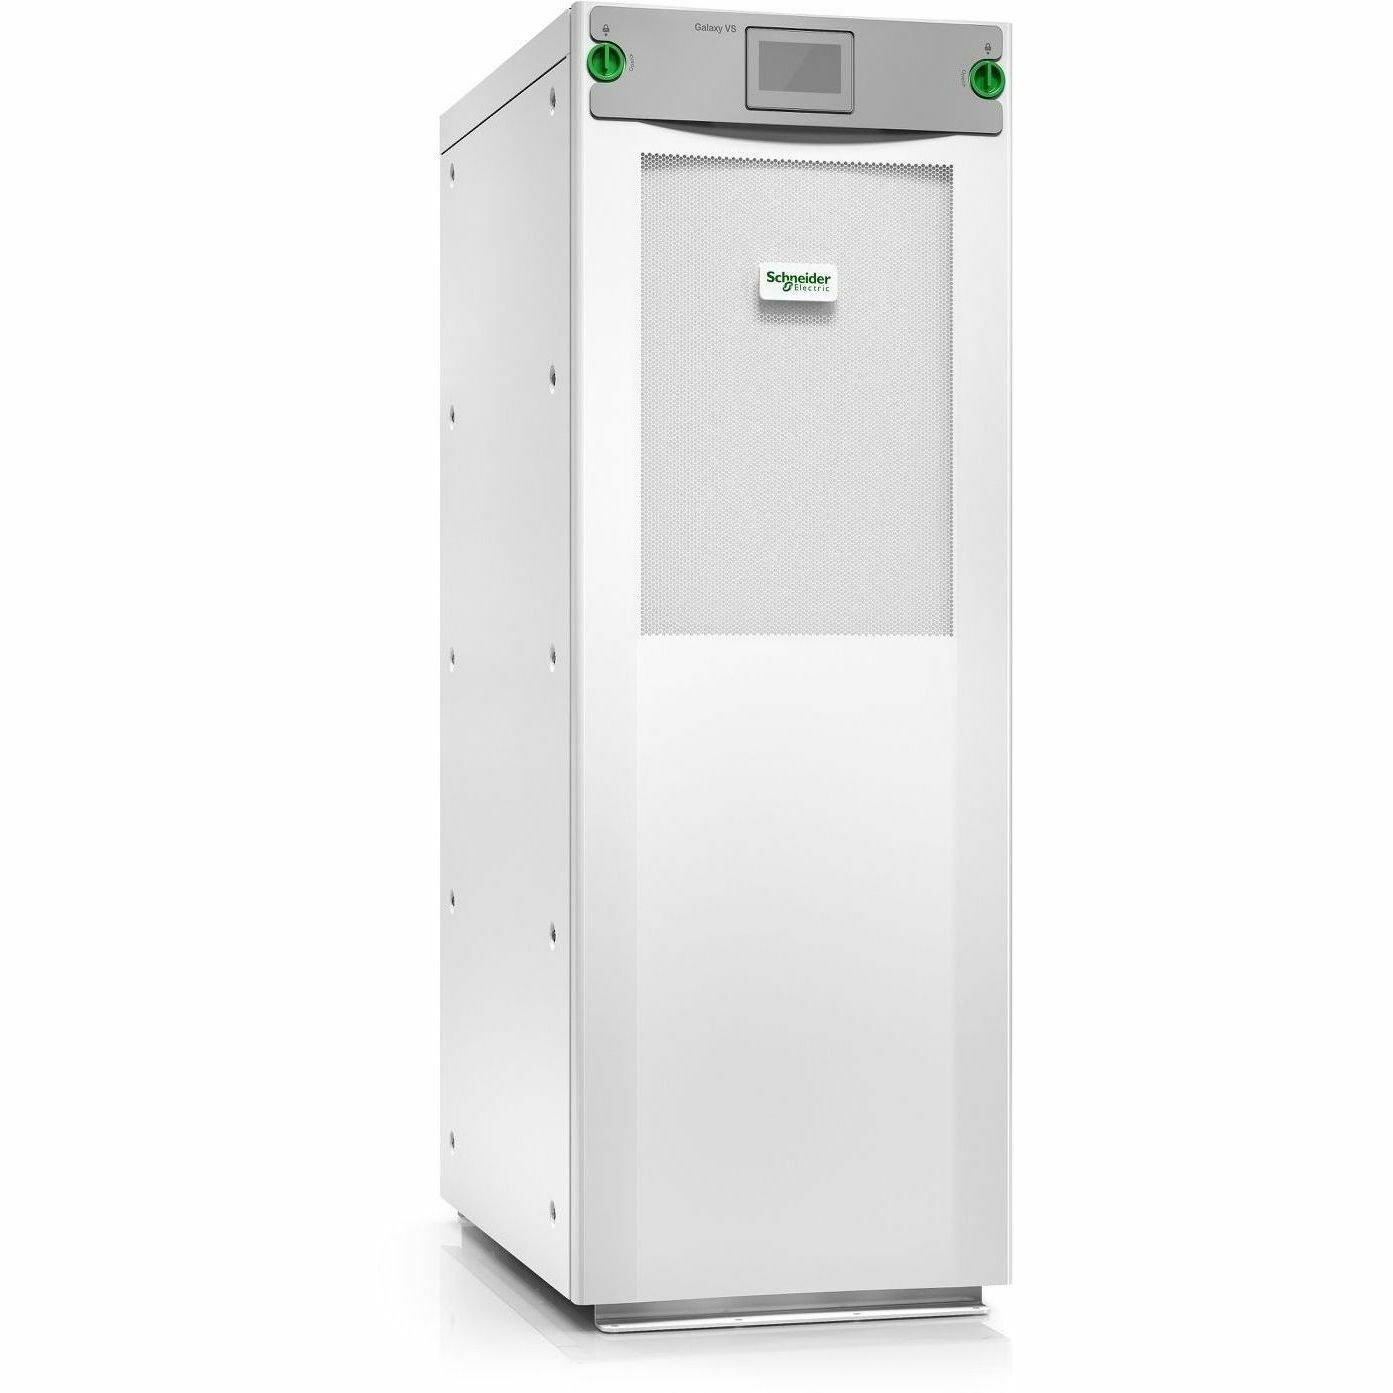 APC by Schneider Electric Galaxy VS Double Conversion Online UPS - 60 kVA/60 kW - Three Phase